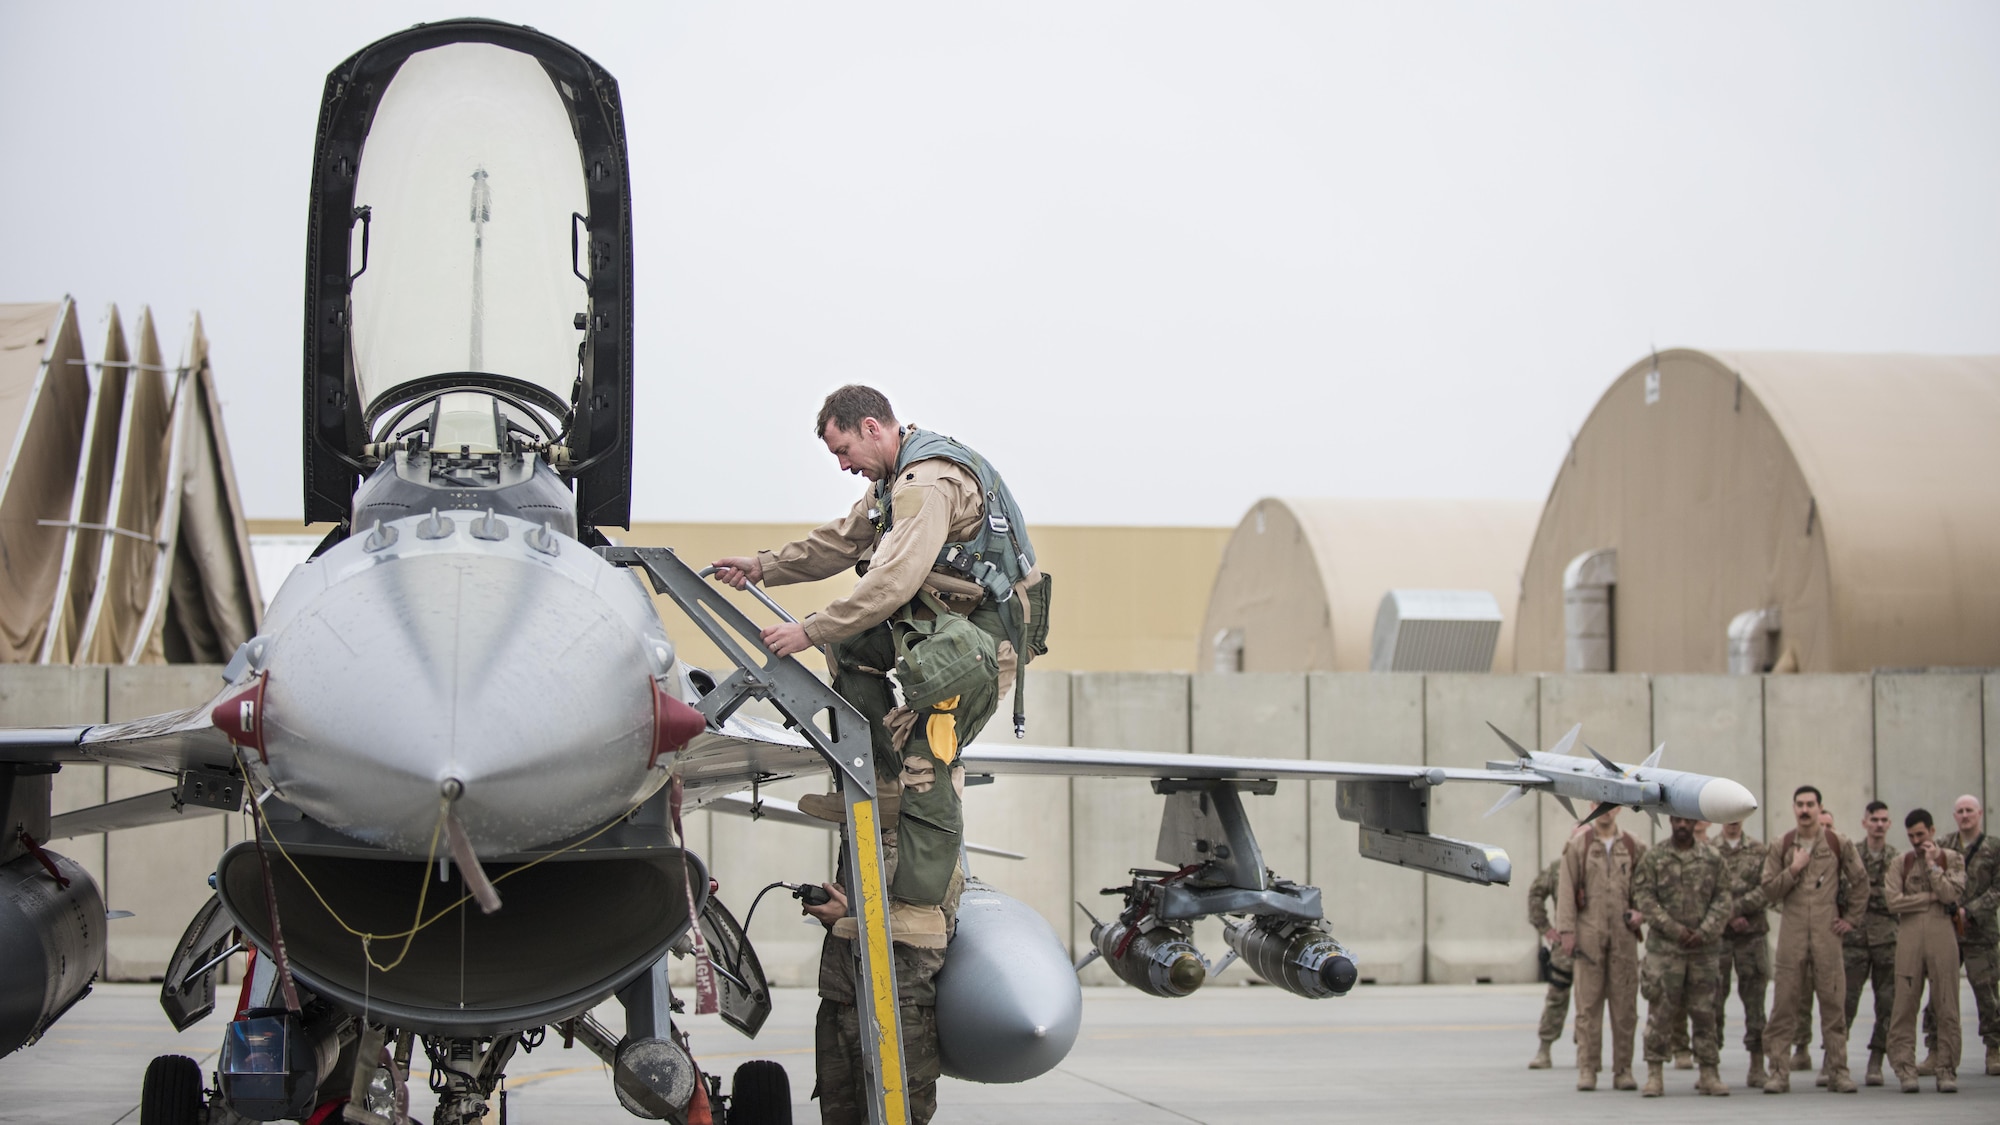 Lt. Col. Craig Andrle, 79th Expeditionary Fighter Squadron commander, climbs down from an F-16 Fighting Falcon as members of the 79th EFS wait to congratulate him on flying his 1,000th combat hour March 20, 2017 at Bagram Airfield, Afghanistan. Andrle reached the milestone while supporting the wing’s counterterrorism mission in Afghanistan. (U.S. Air Force photo by Staff Sgt. Katherine Spessa)